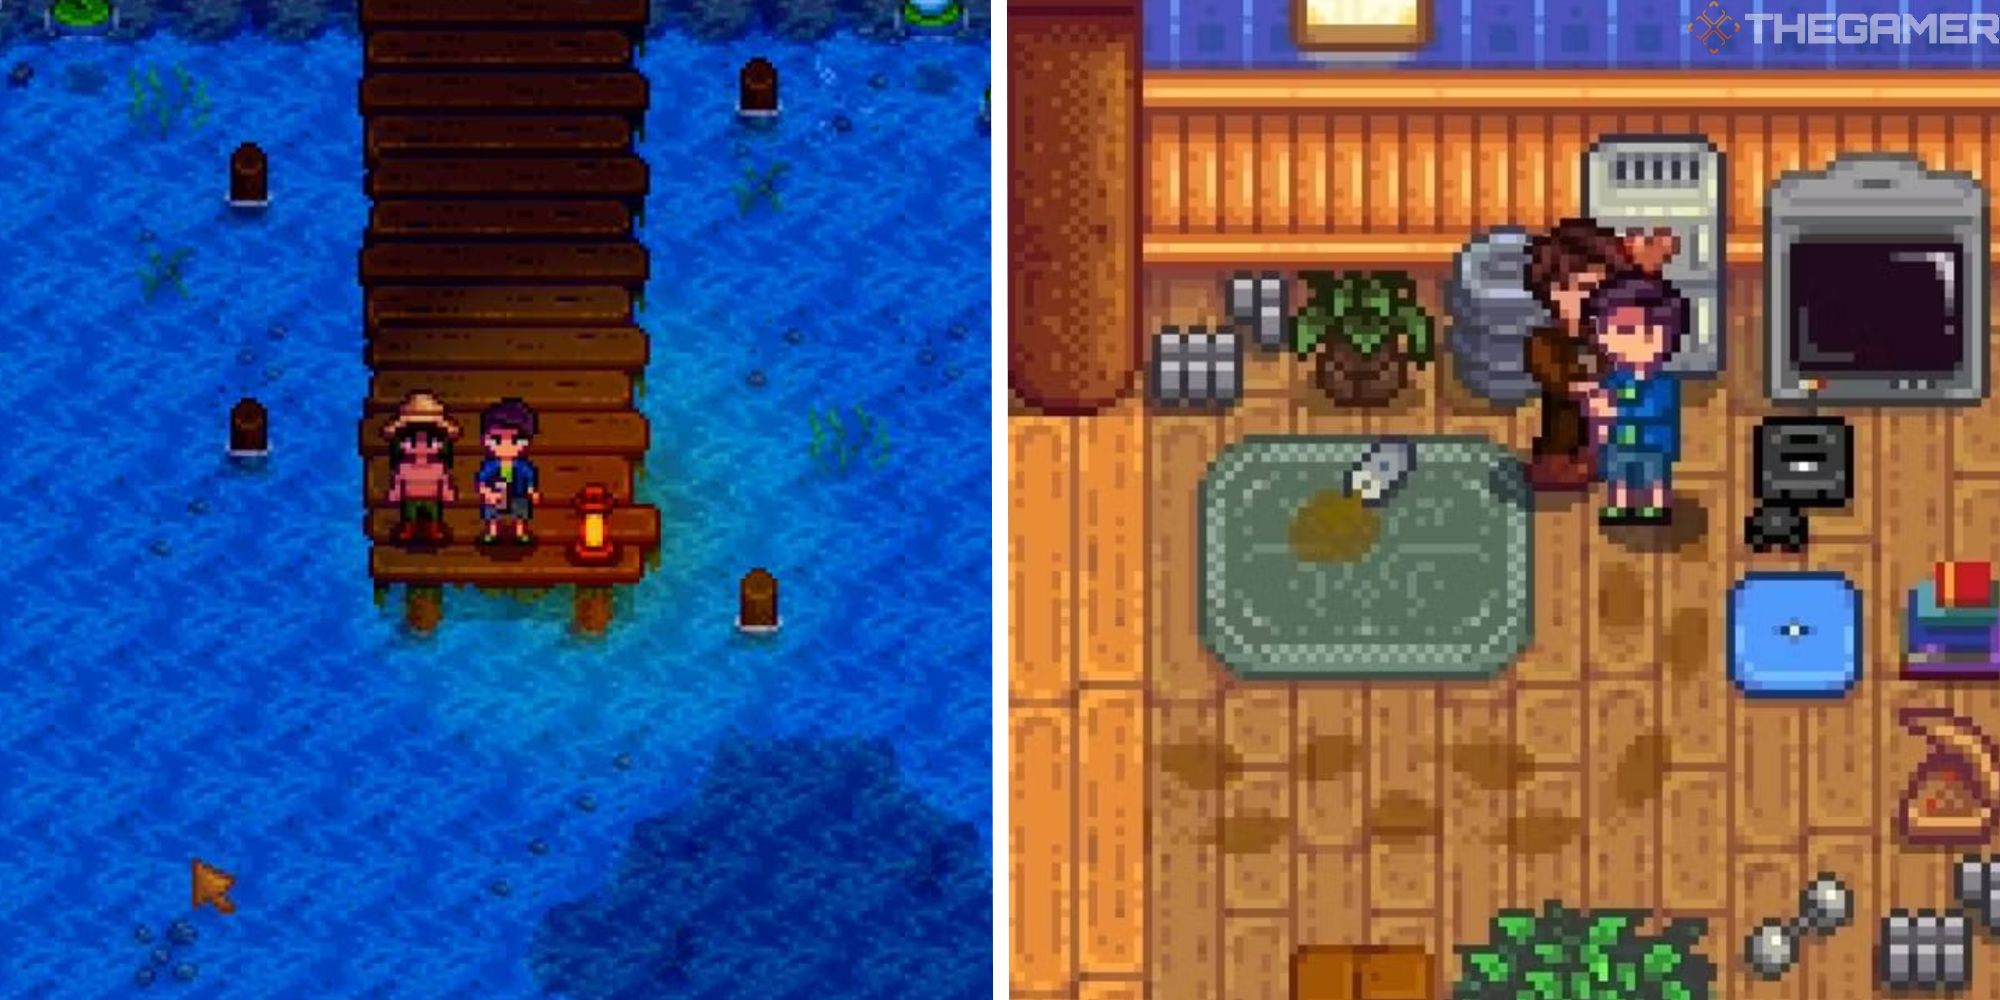 split image showing shane and player on dock, next to image of player and shane kissing in his spouse room